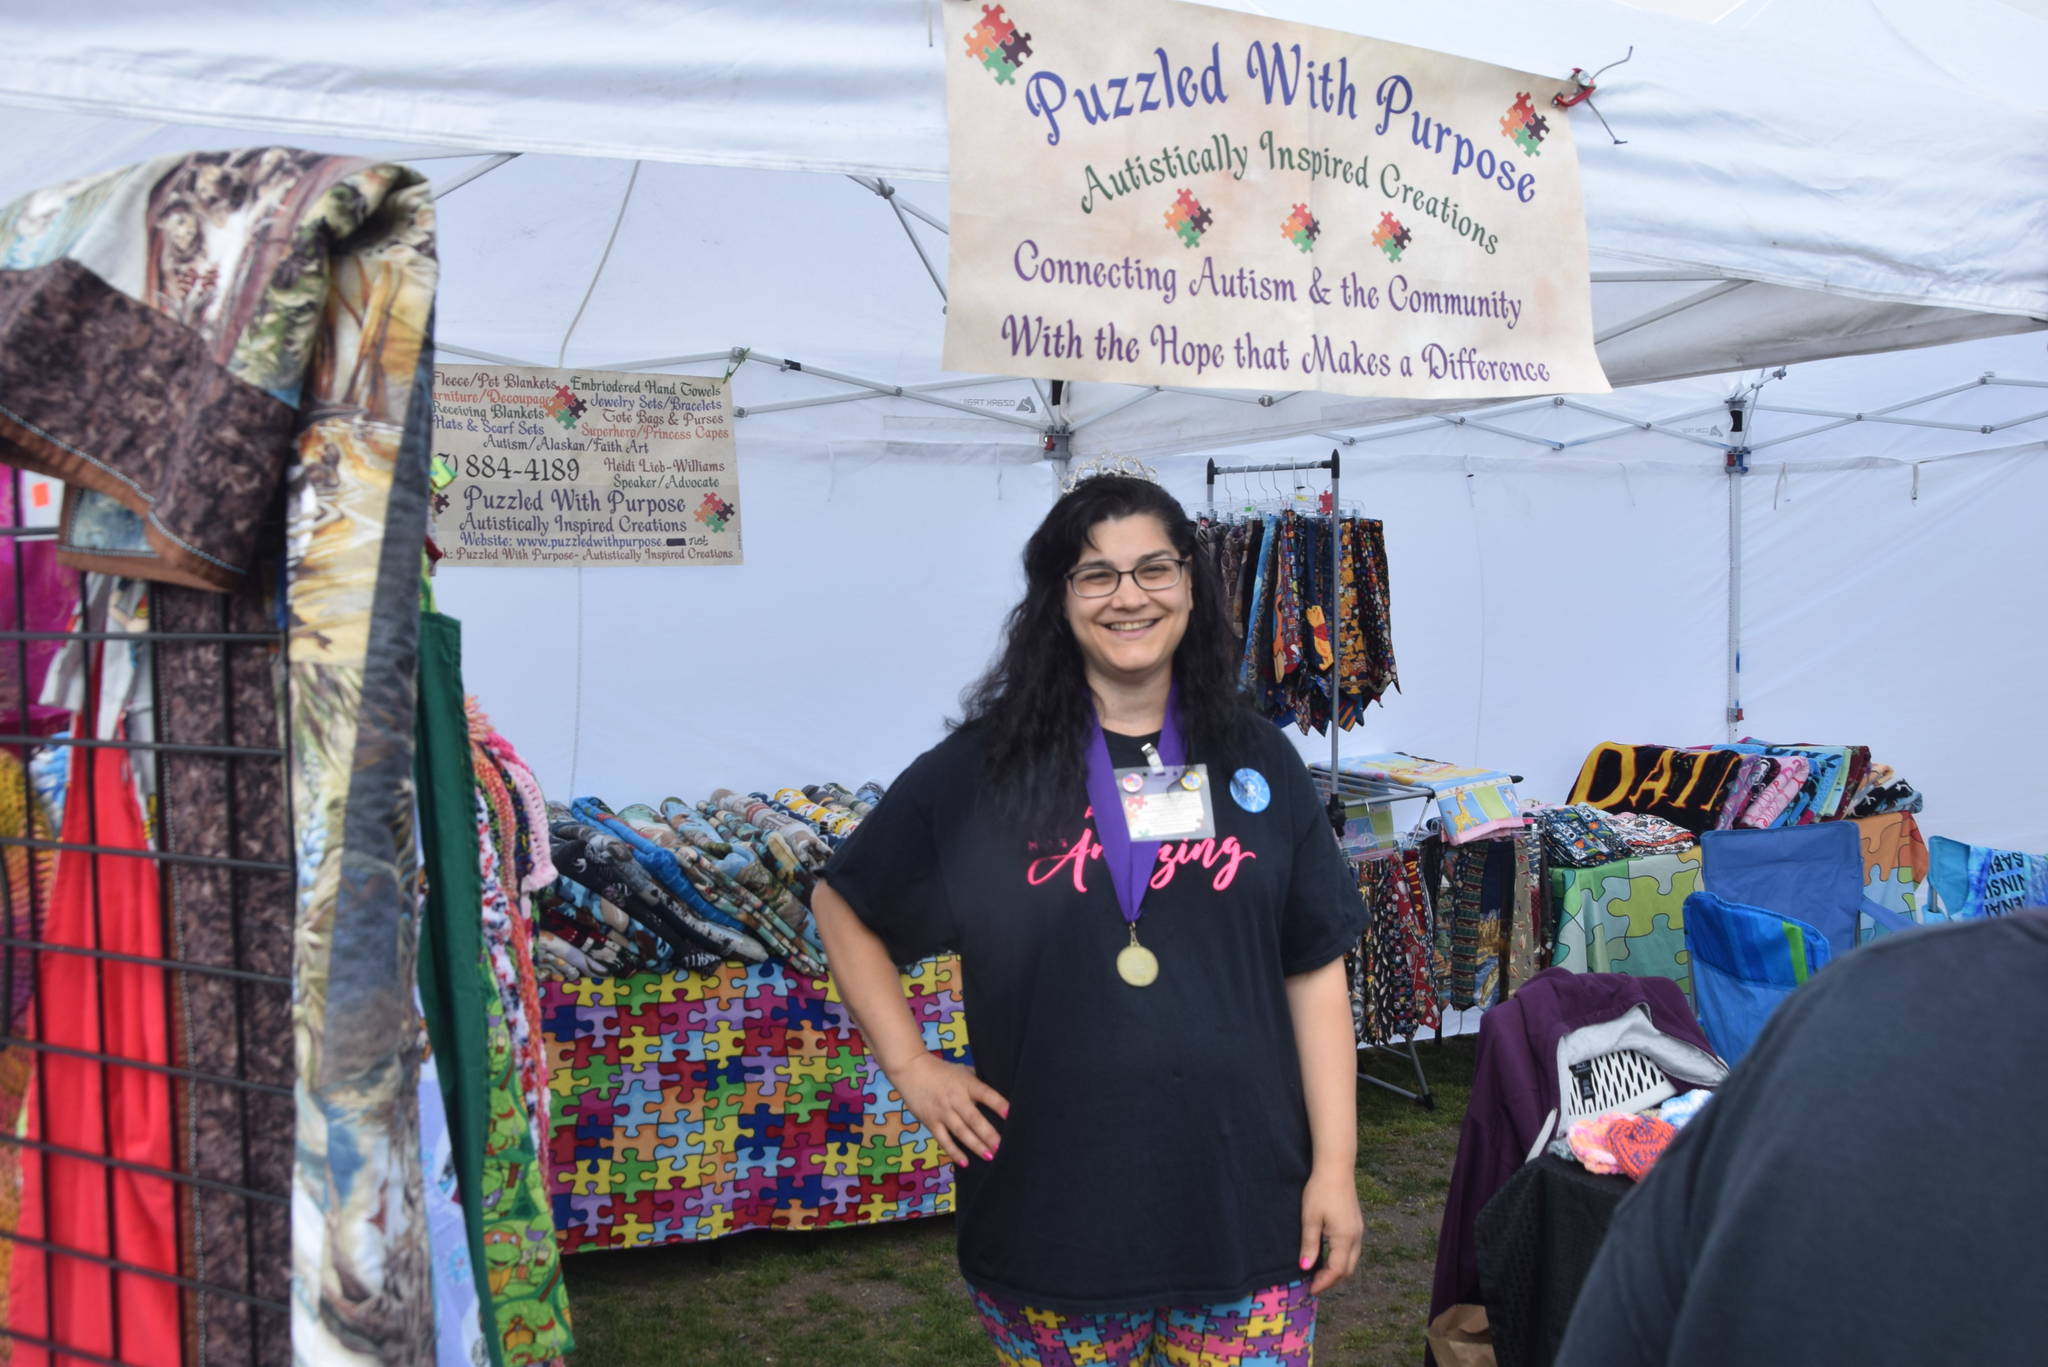 Heidi Lieb-Williams poses in front of her vendor booth during the 2019 Disability Pride Celebration in Soldotna Creek Park on July 20, 2019. (Photo by Brian Mazurek/Peninsula Clarion)